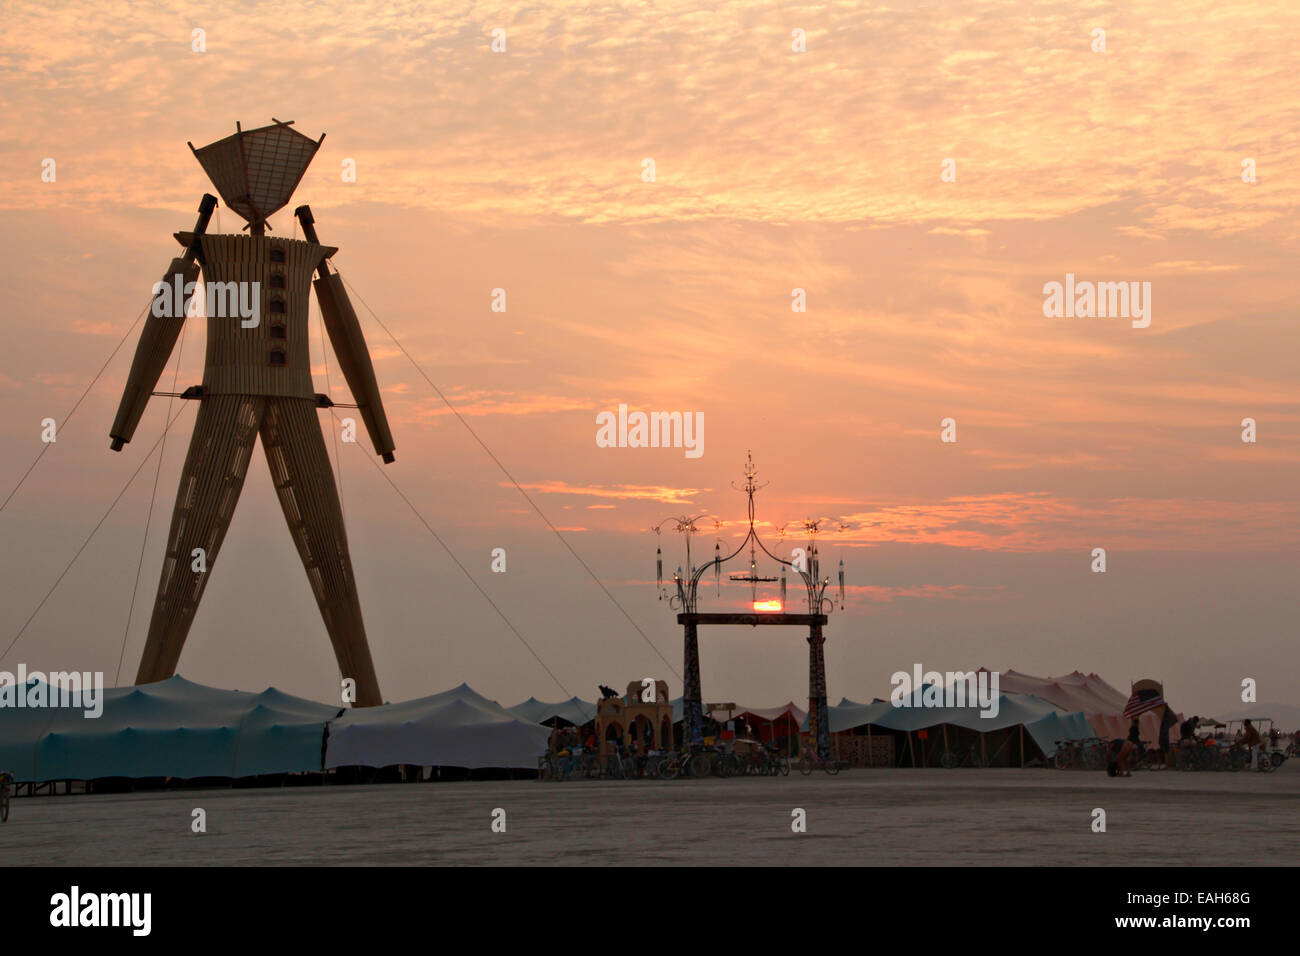 Sunrise over the art installation Burning Man on the playa at the annual Burning Man festival in the desert August 29, 2014 in Black Rock City, Nevada. Stock Photo